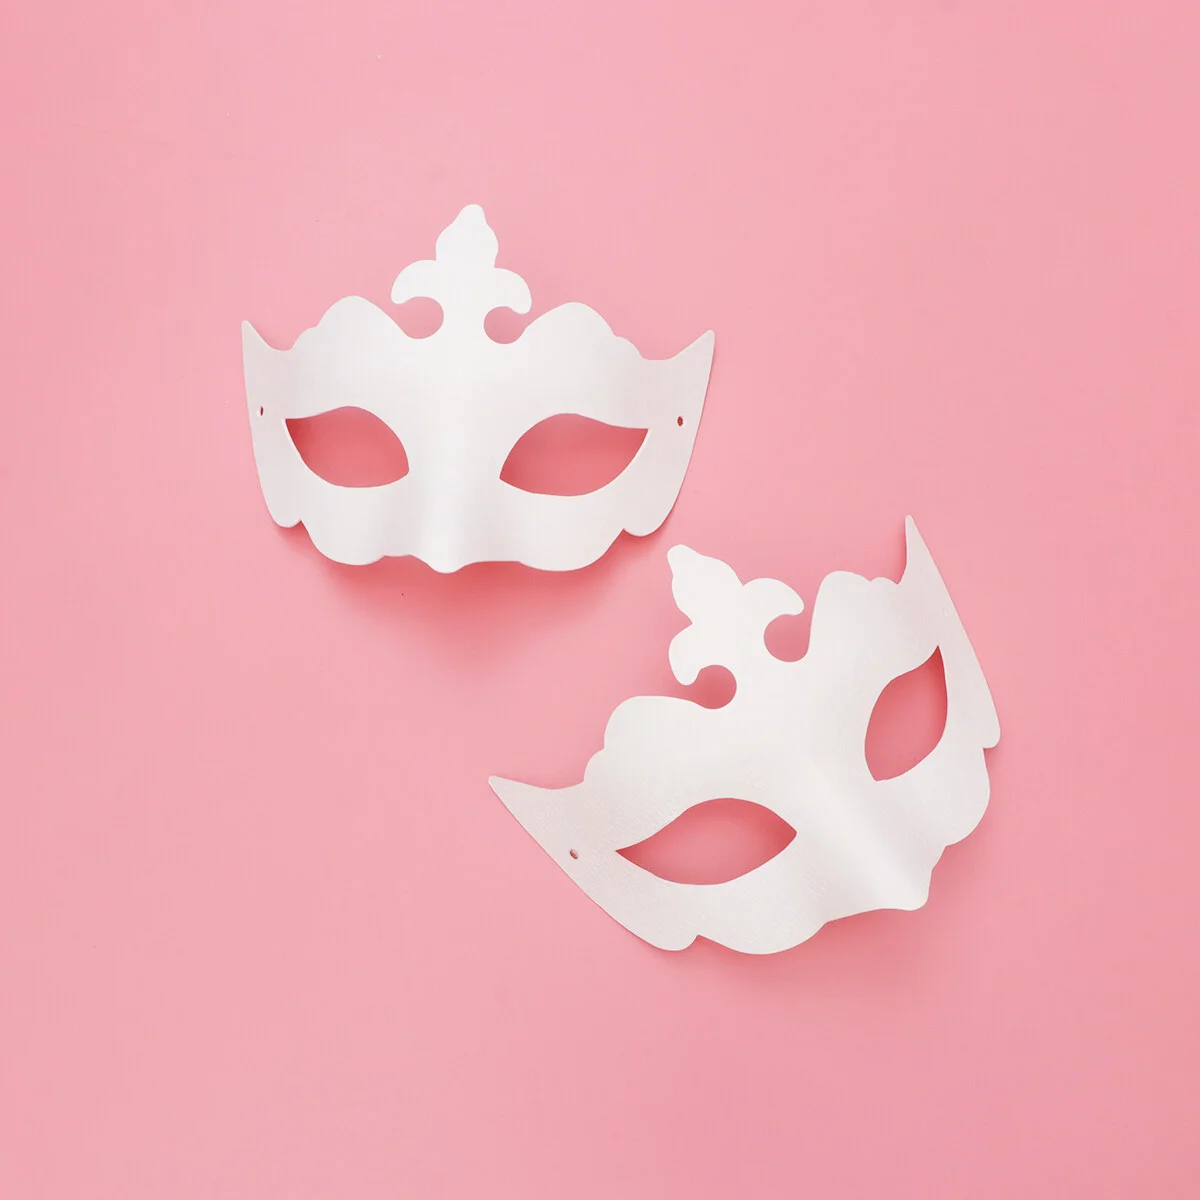 

10Pcs Crown Shape Mask Hand-Painted Mask Halloween DIY Blank Mask Eco-friendly Pulp Party Mask Masquerade Costume Cosplay